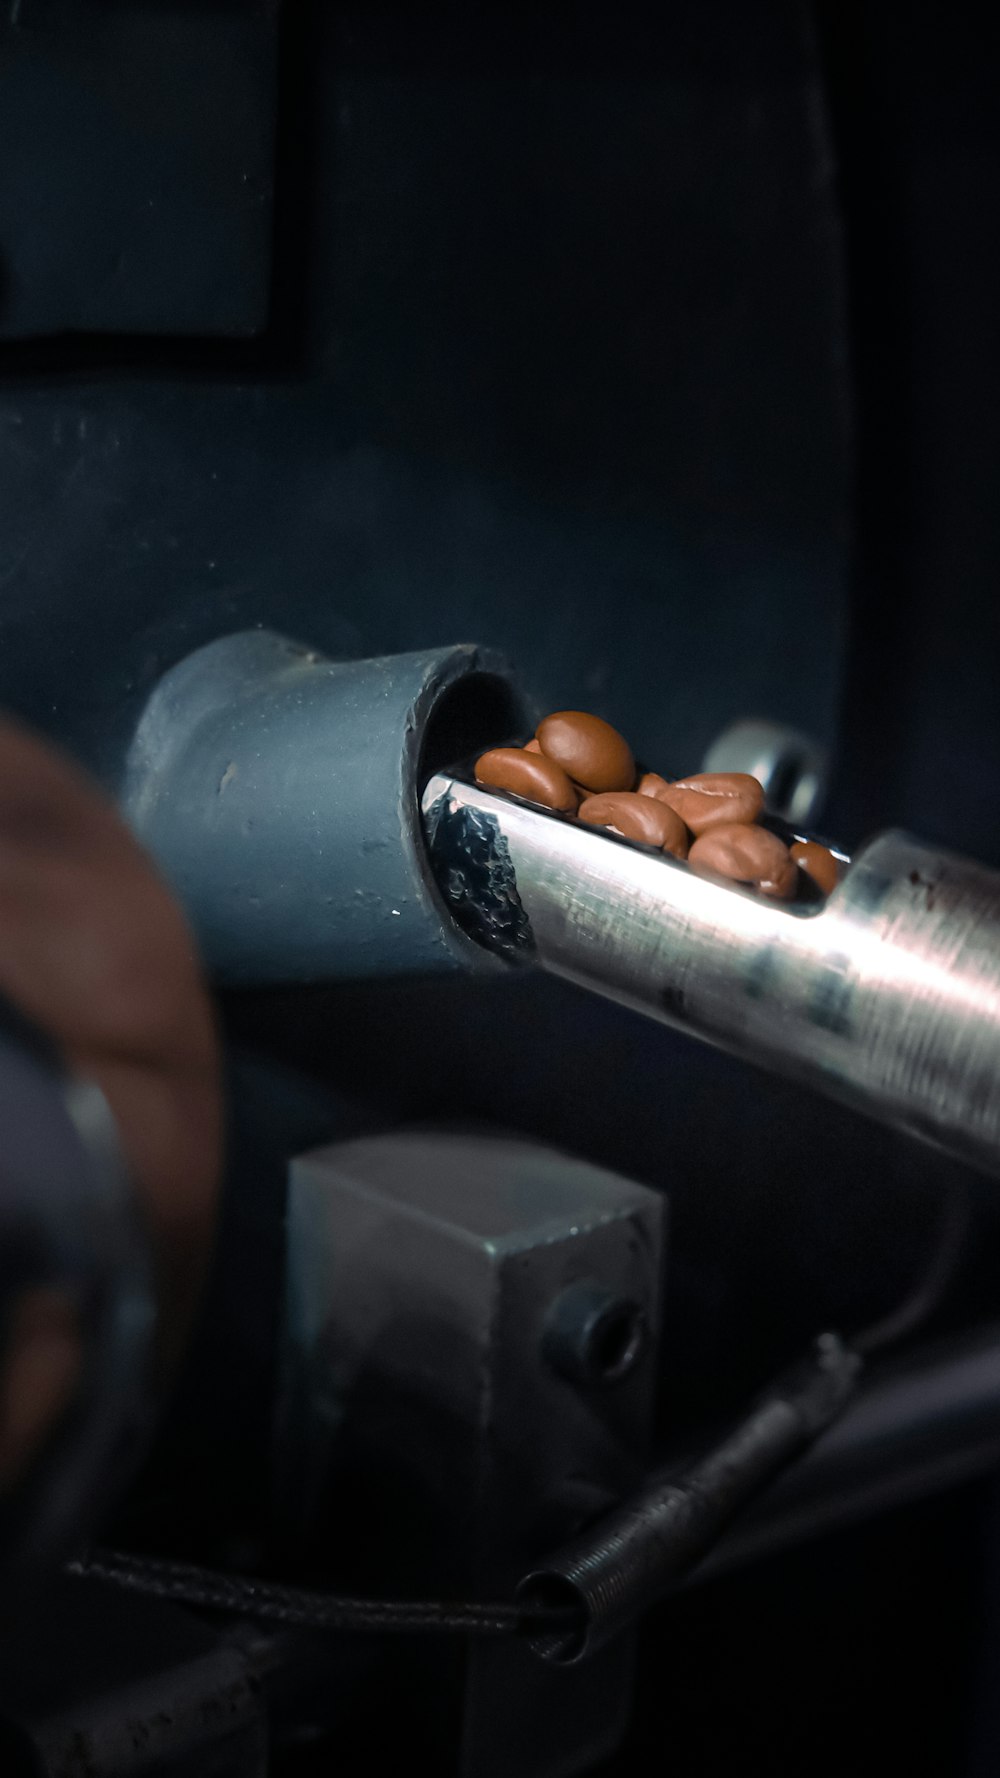 nuts are being processed in a machine at a factory